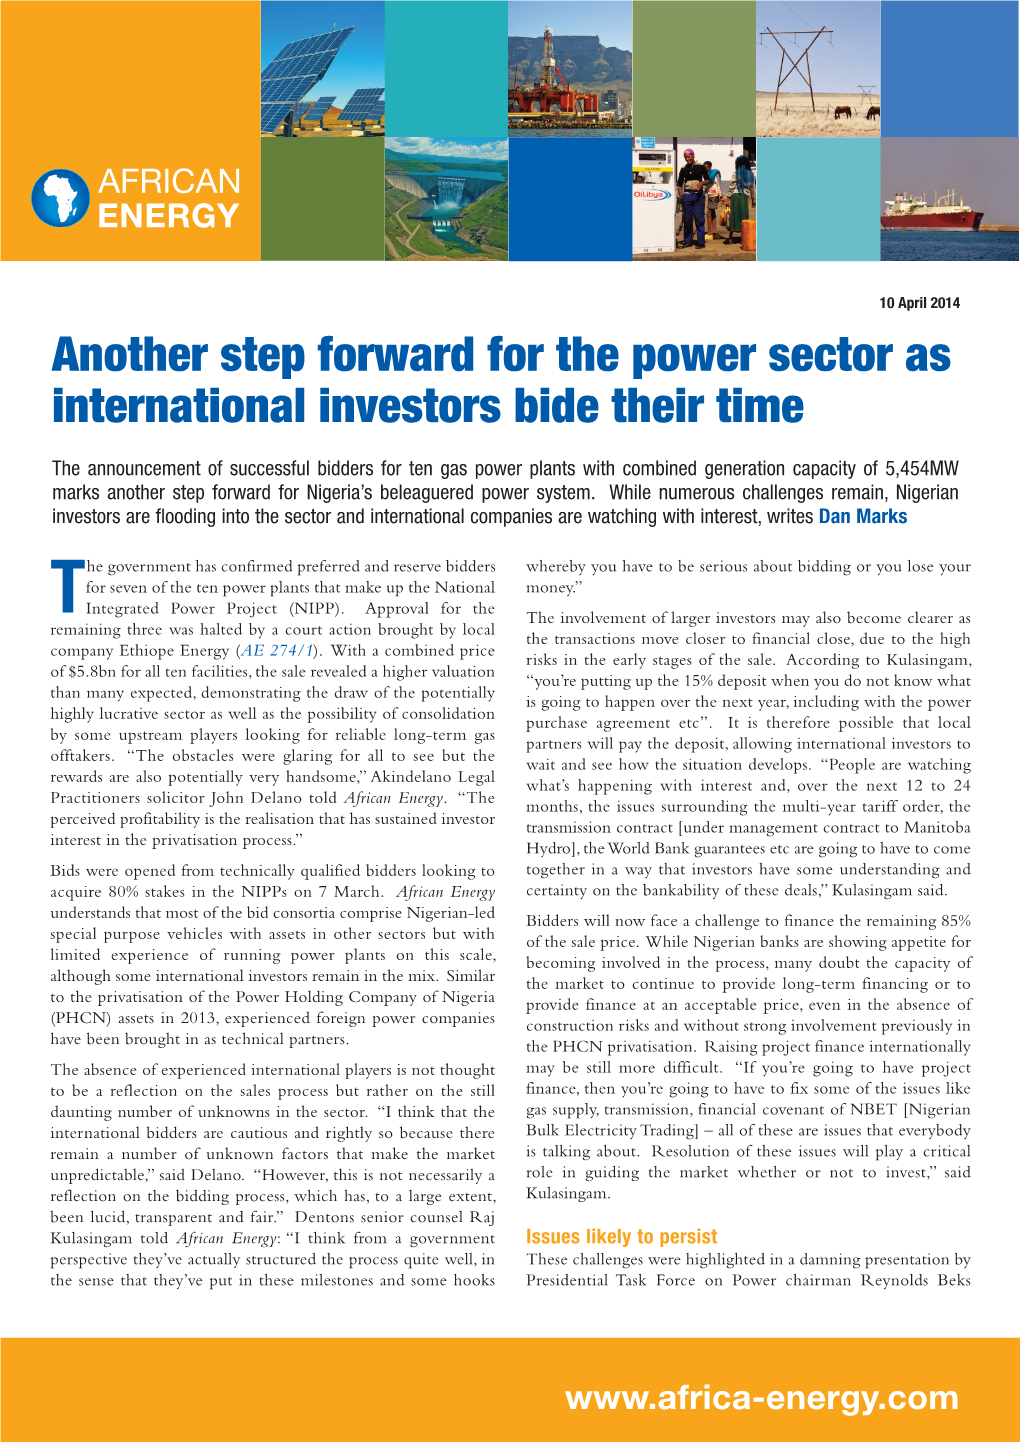 Another Step Forward for the Power Sector As International Investors Bide Their Time